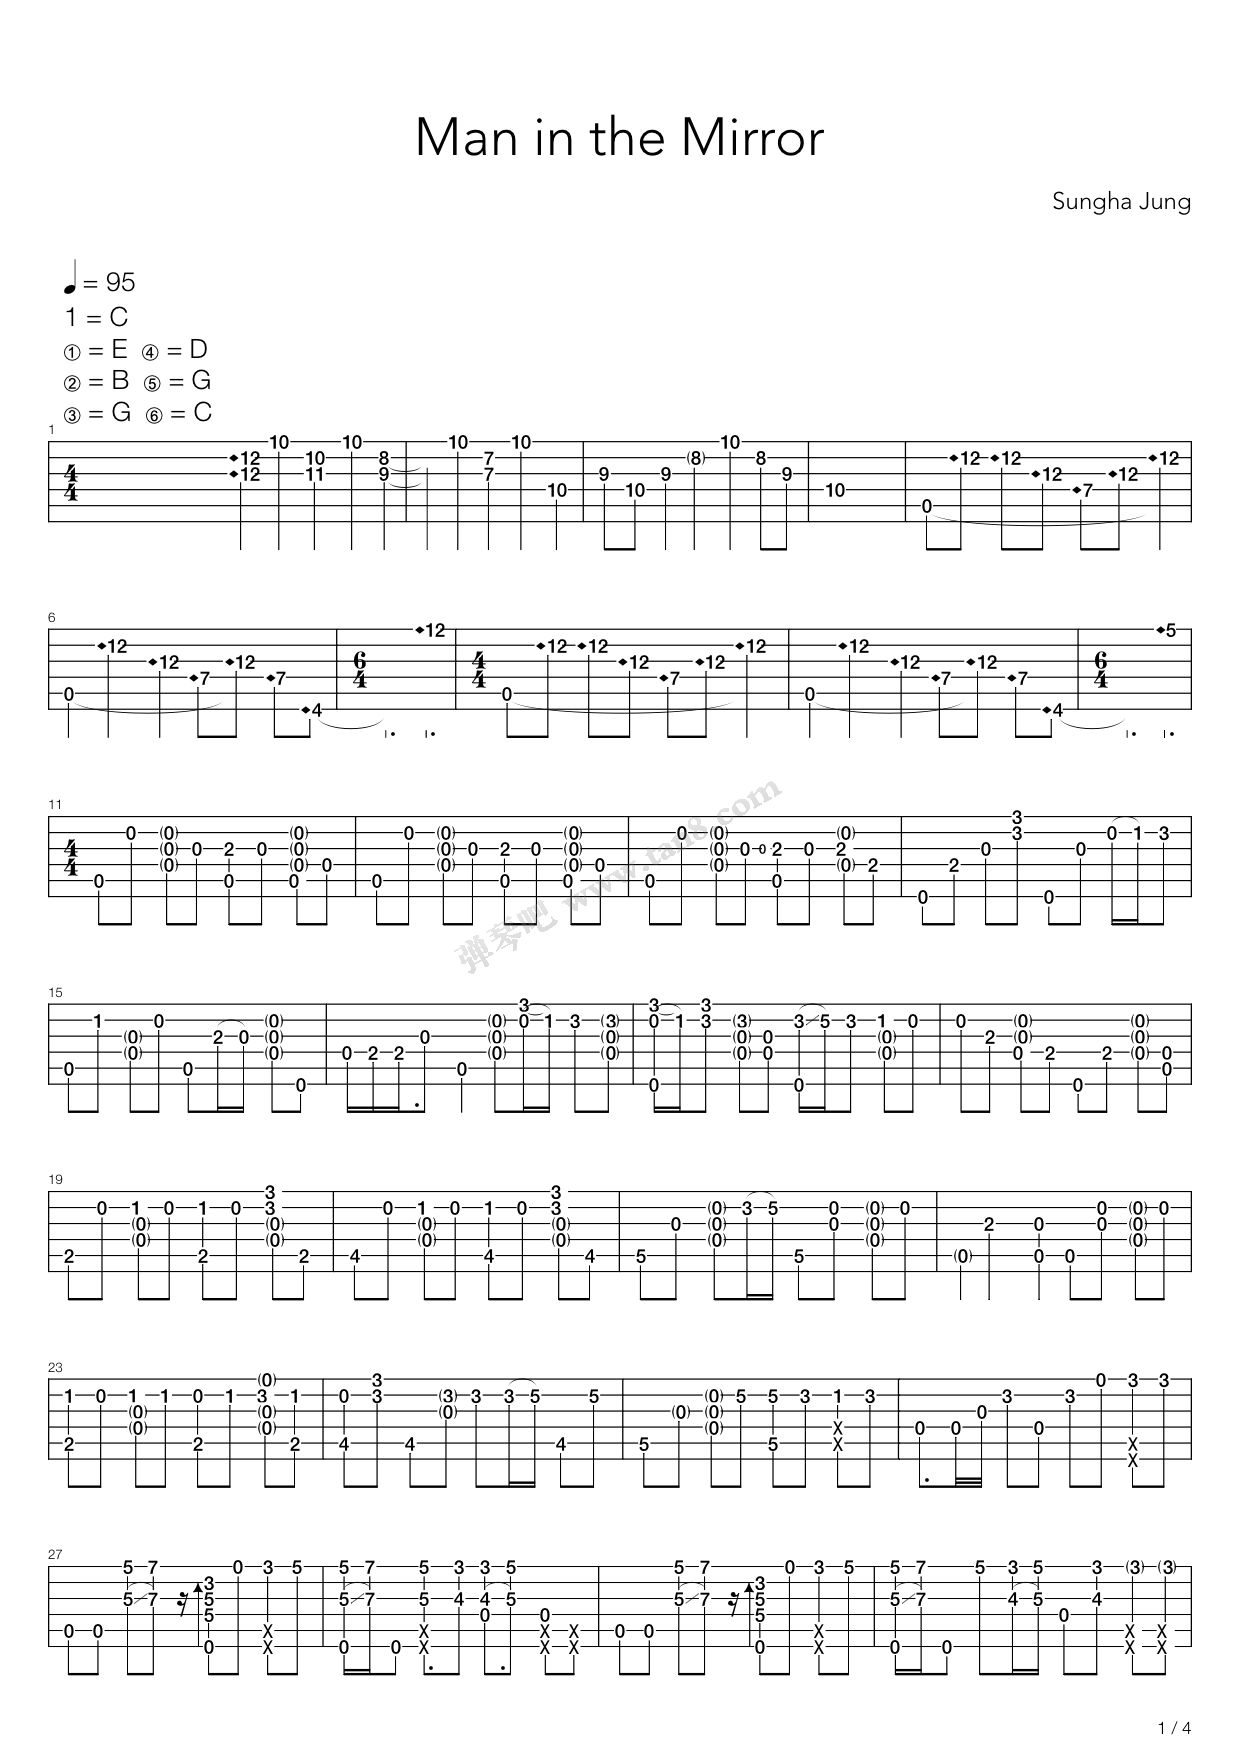 Man In The Mirror By Sungha Jung Guitar Tabs Chords Sheet Music Free Learnguitarsonline Com